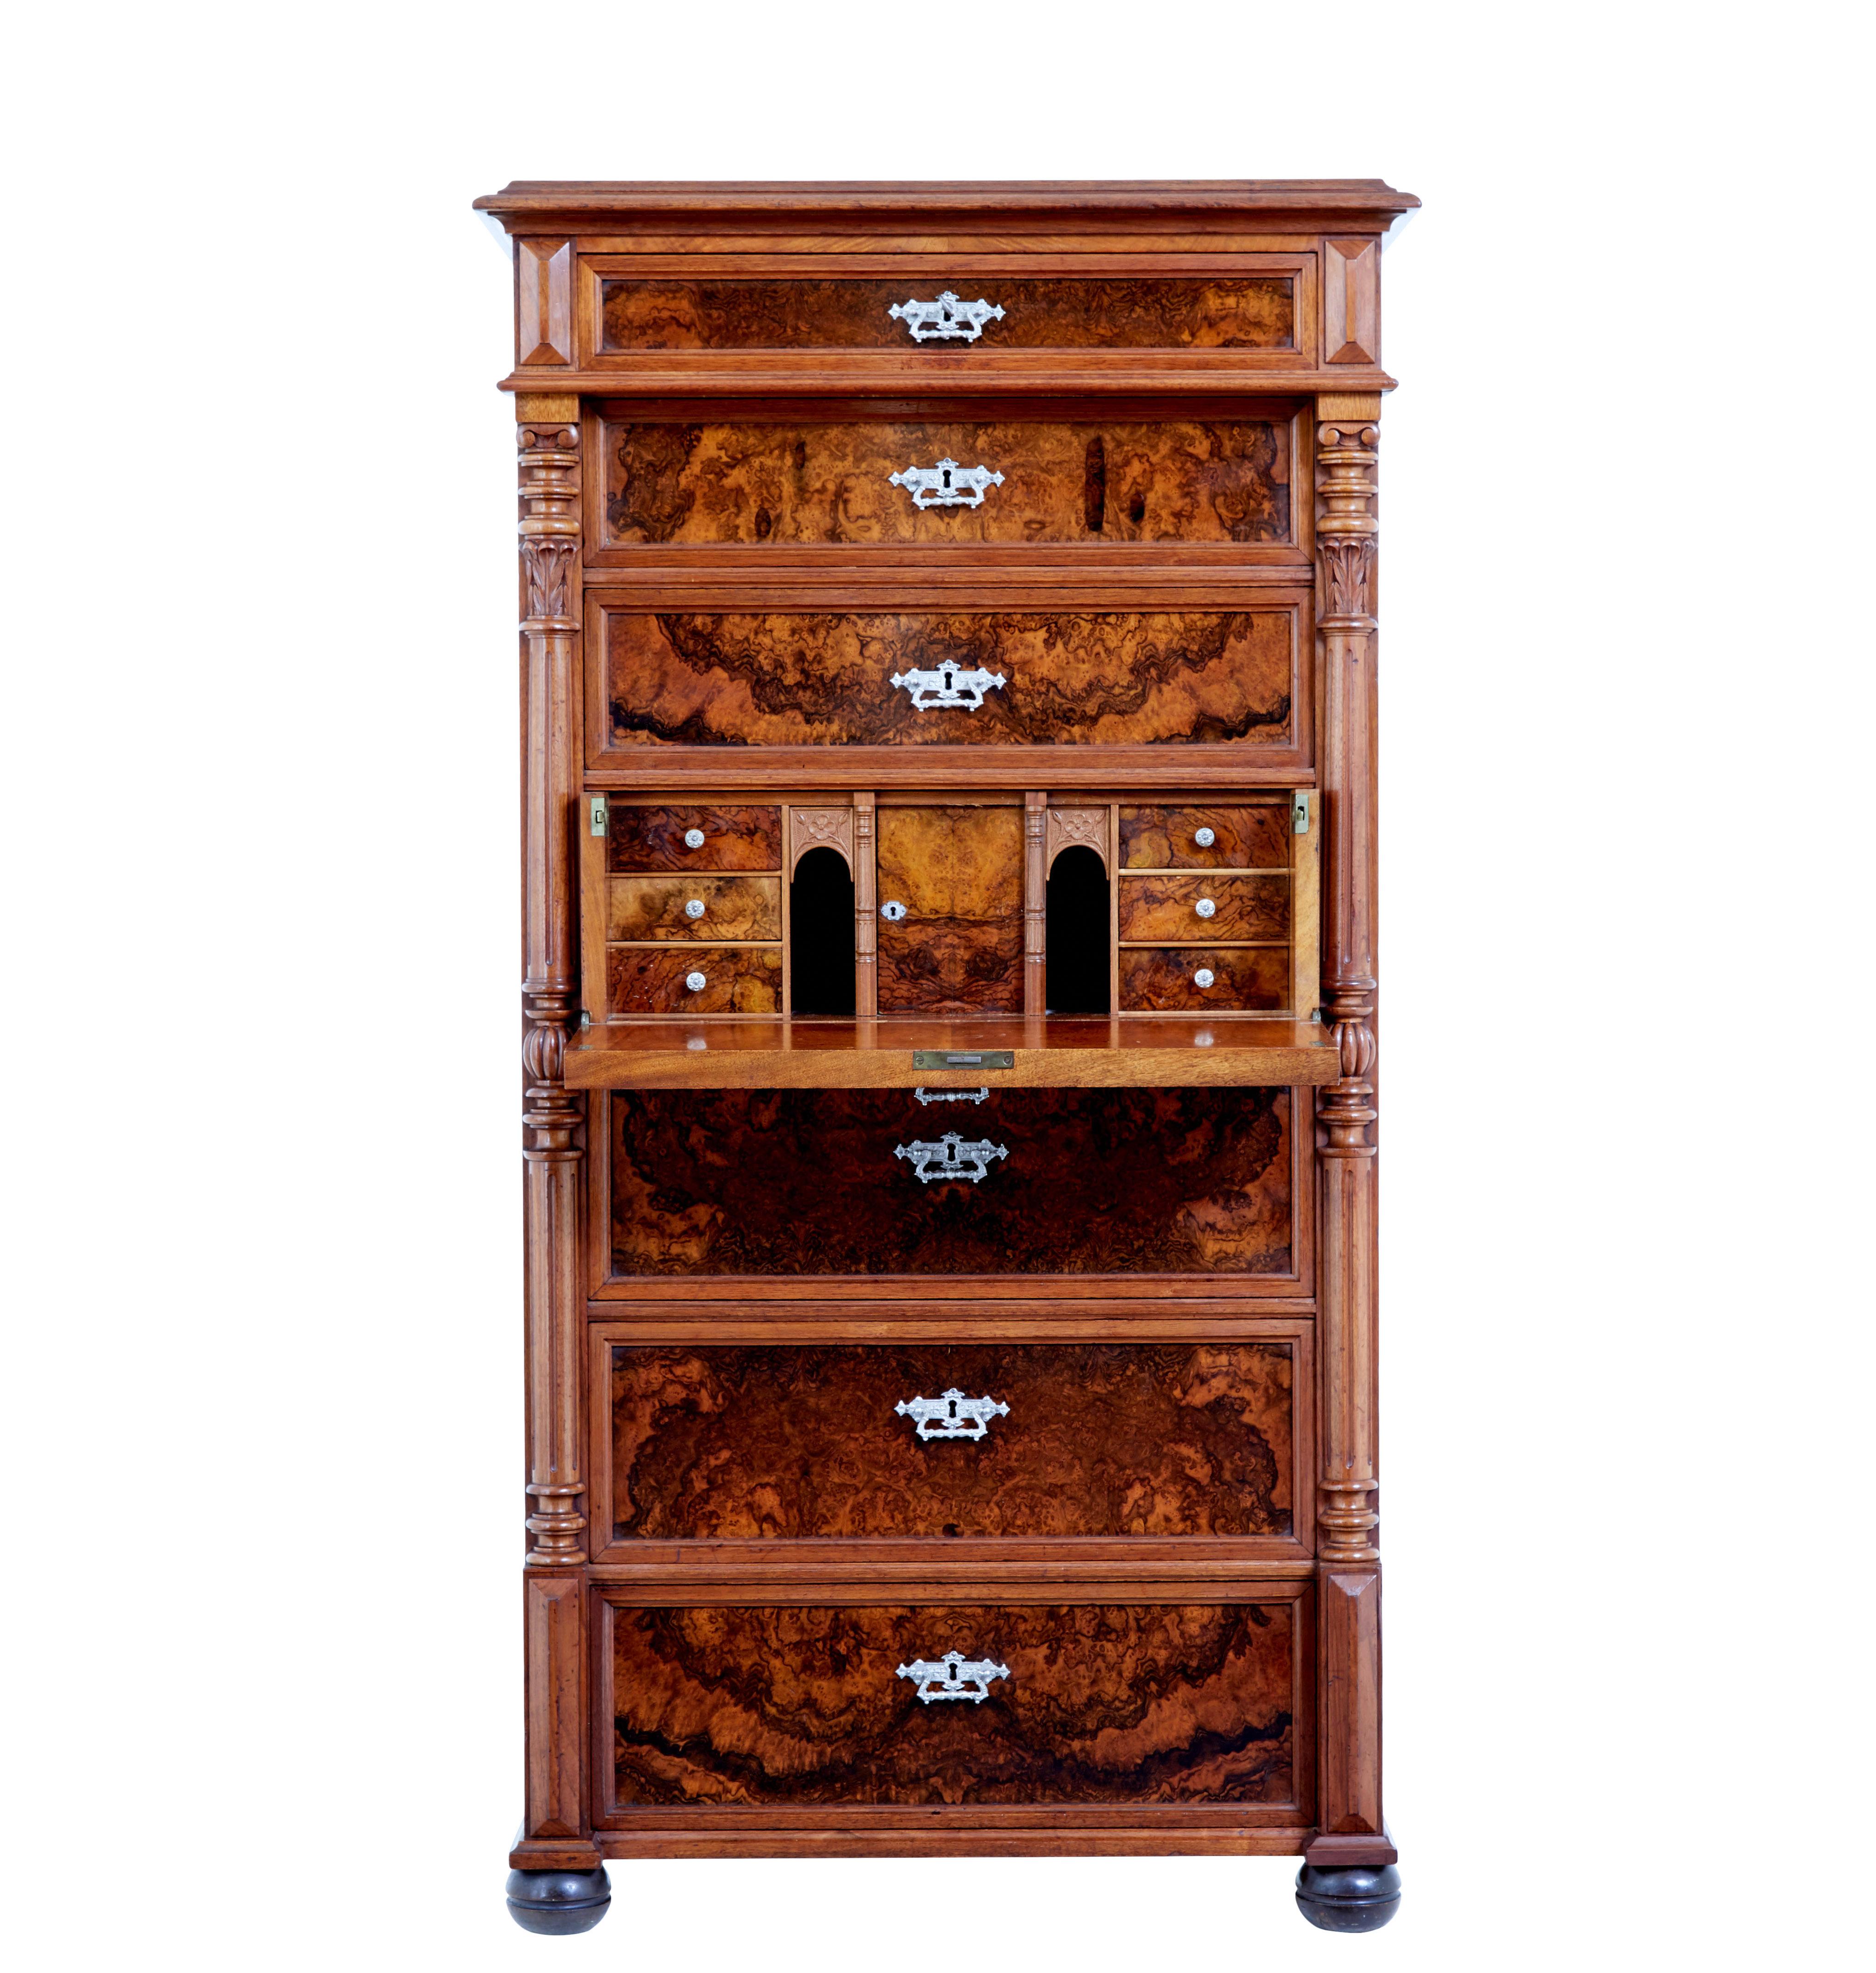 19th century burr walnut secretaire tall chest of drawers circa 1890.

Striking walnut and burr walnut 7 drawer chest, which is often known as a seminere, albeit this one has the addition of a secretaire.

Top drawer slightly overhangs the other